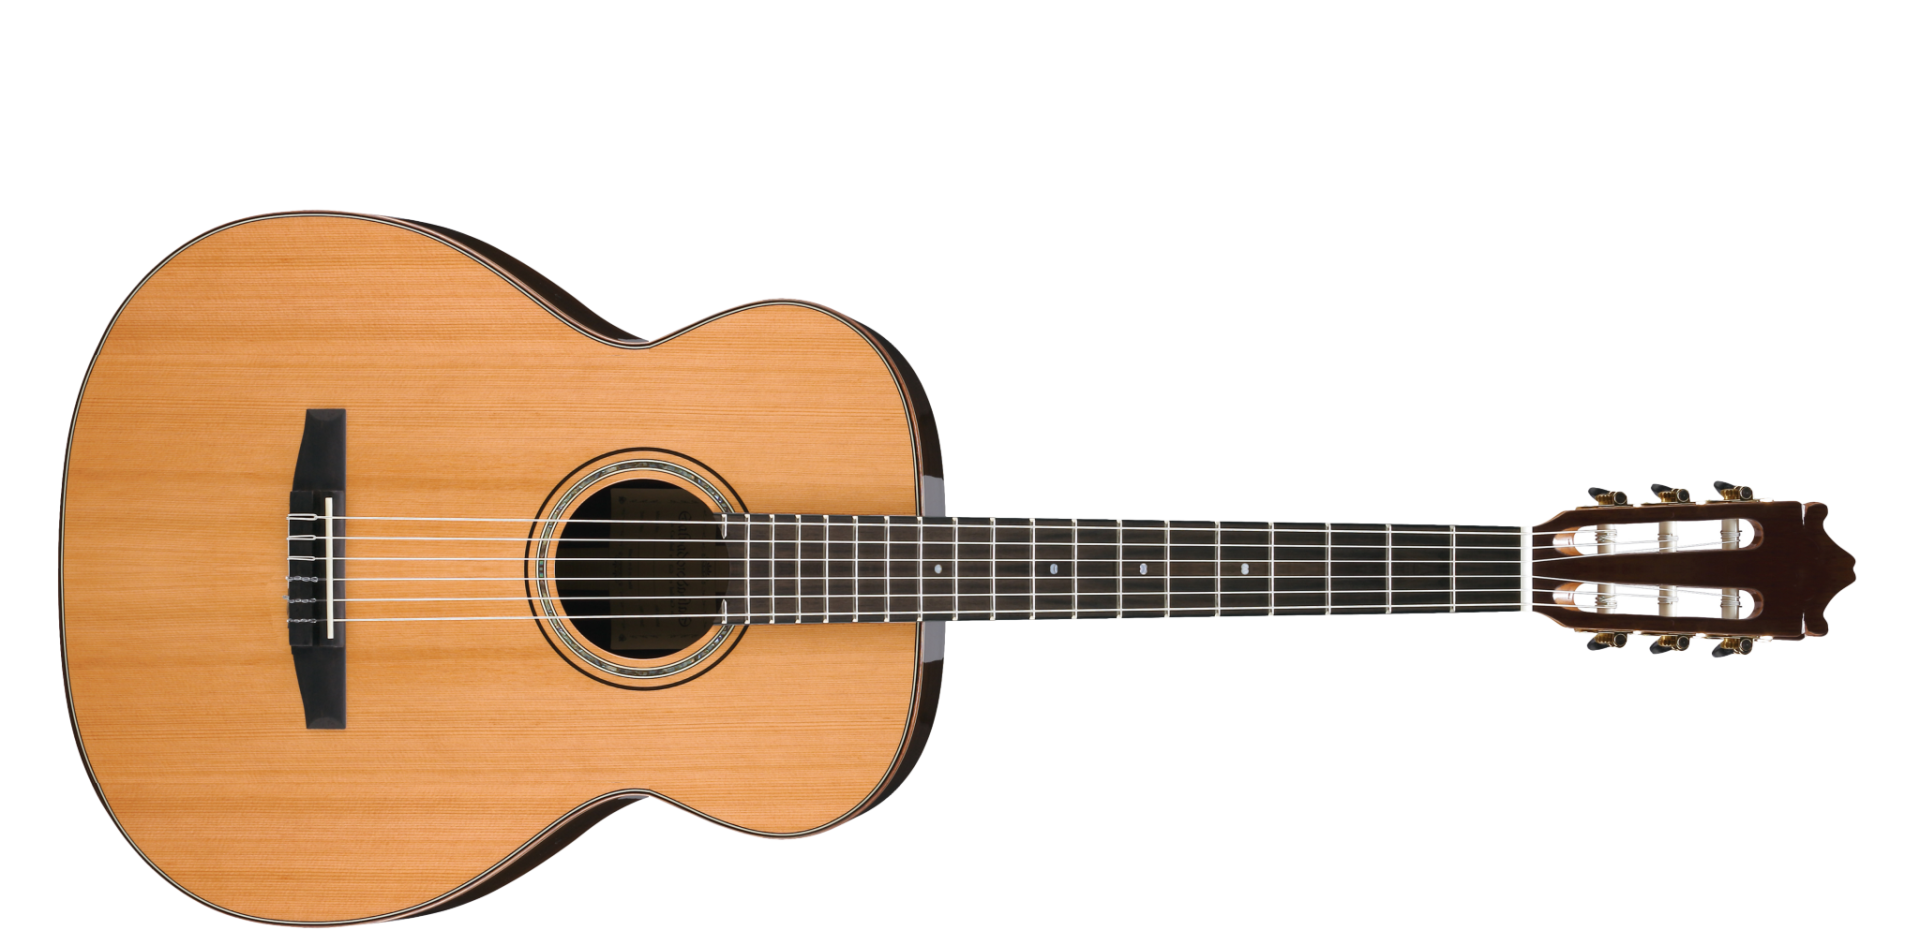 Guitar Steel-String Amplifier Classical Acoustic PNG Download Free Clipart